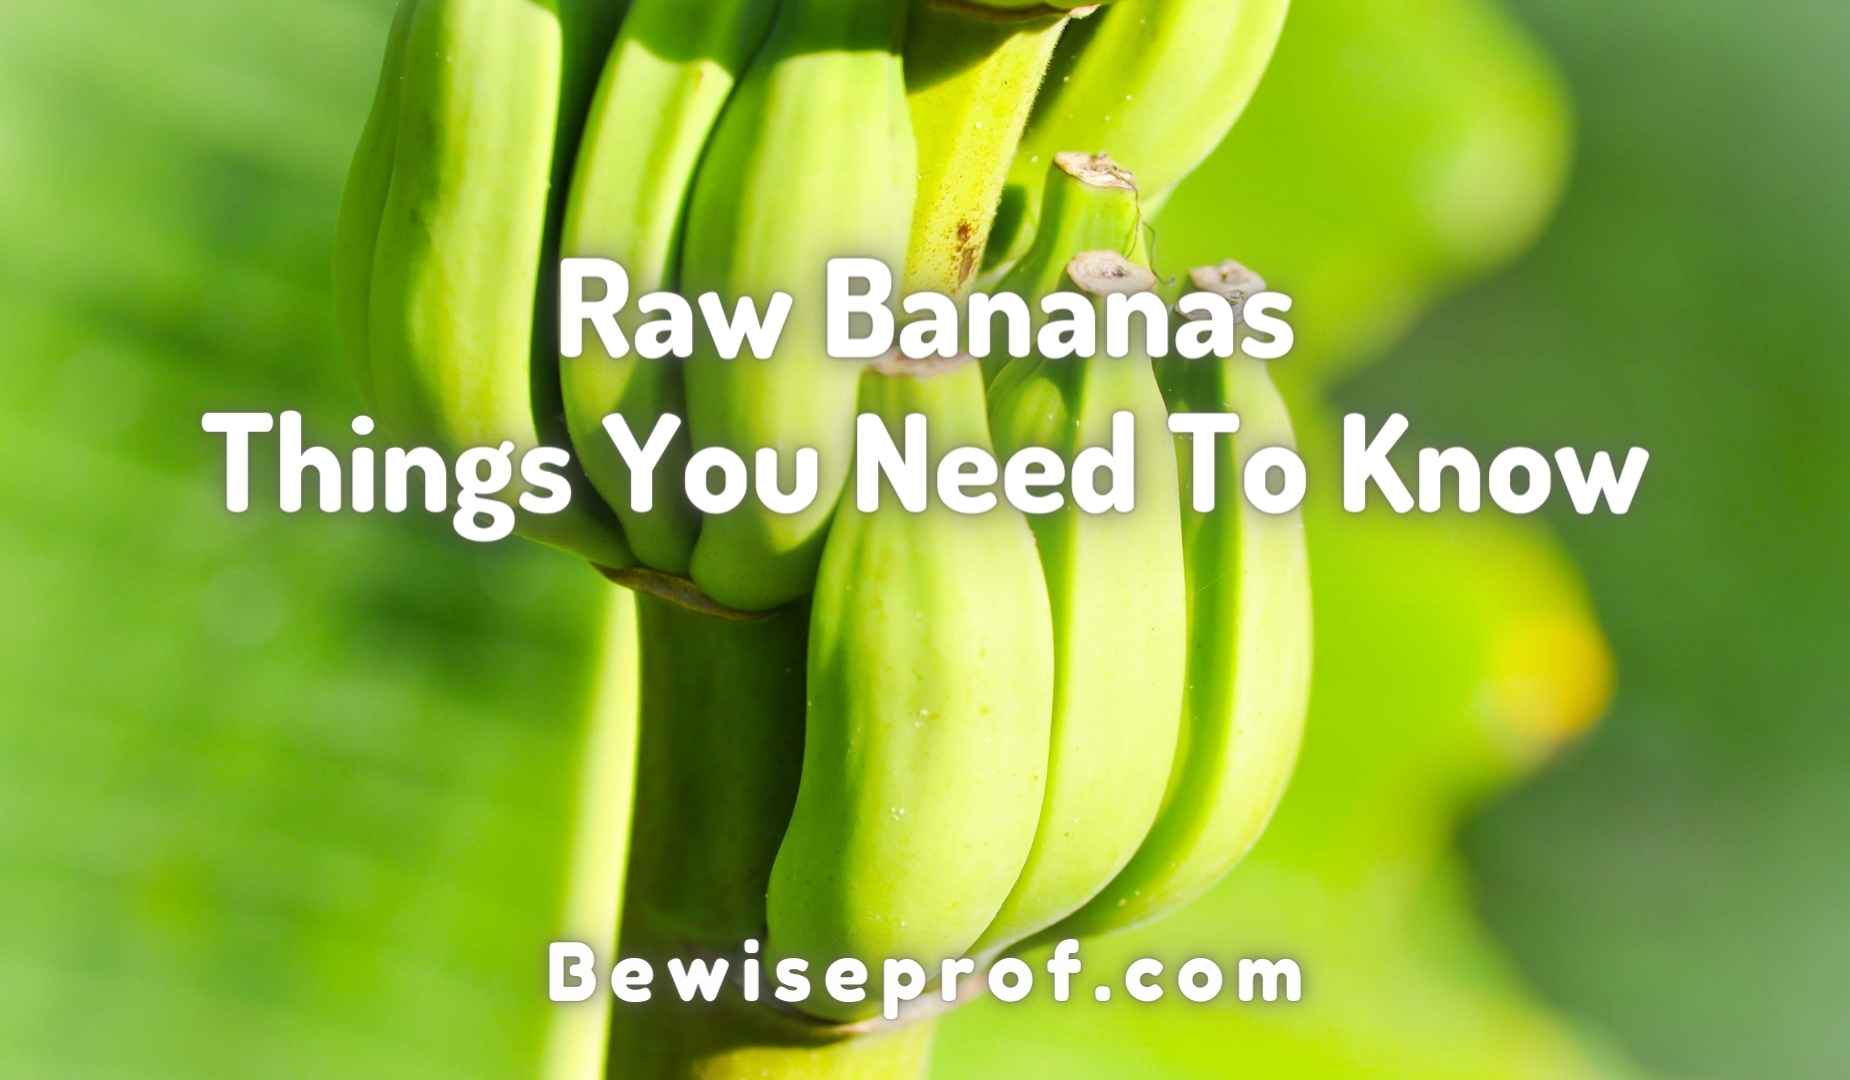 Raw Bananas Benefits, Side Effects